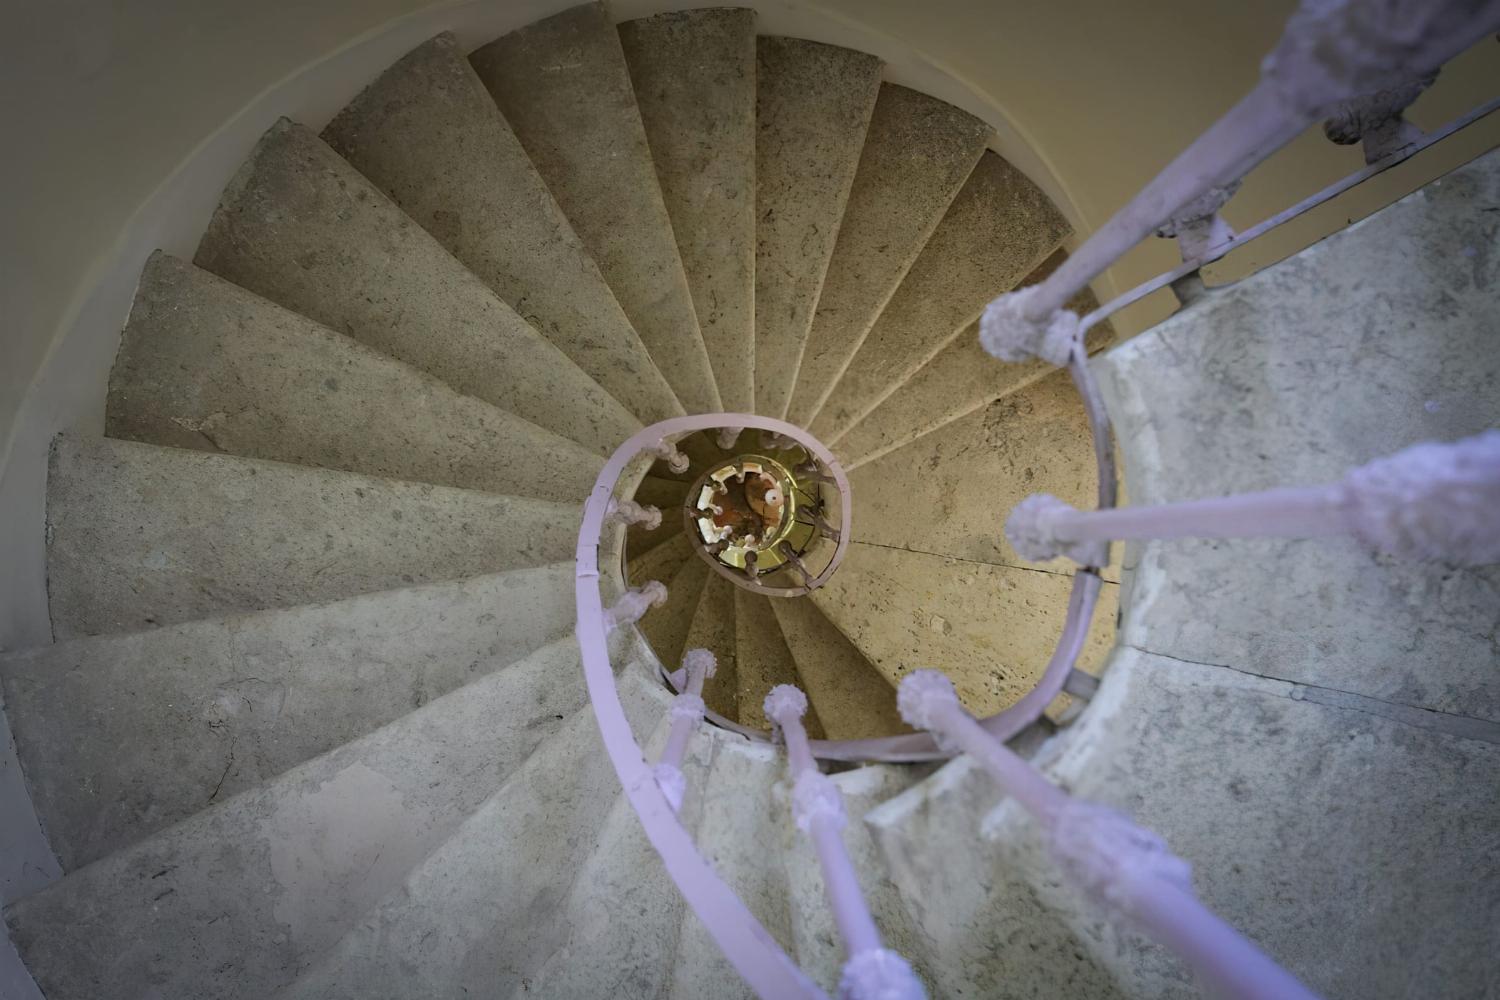 Staircase | Holiday château in Lot-et-Garonne